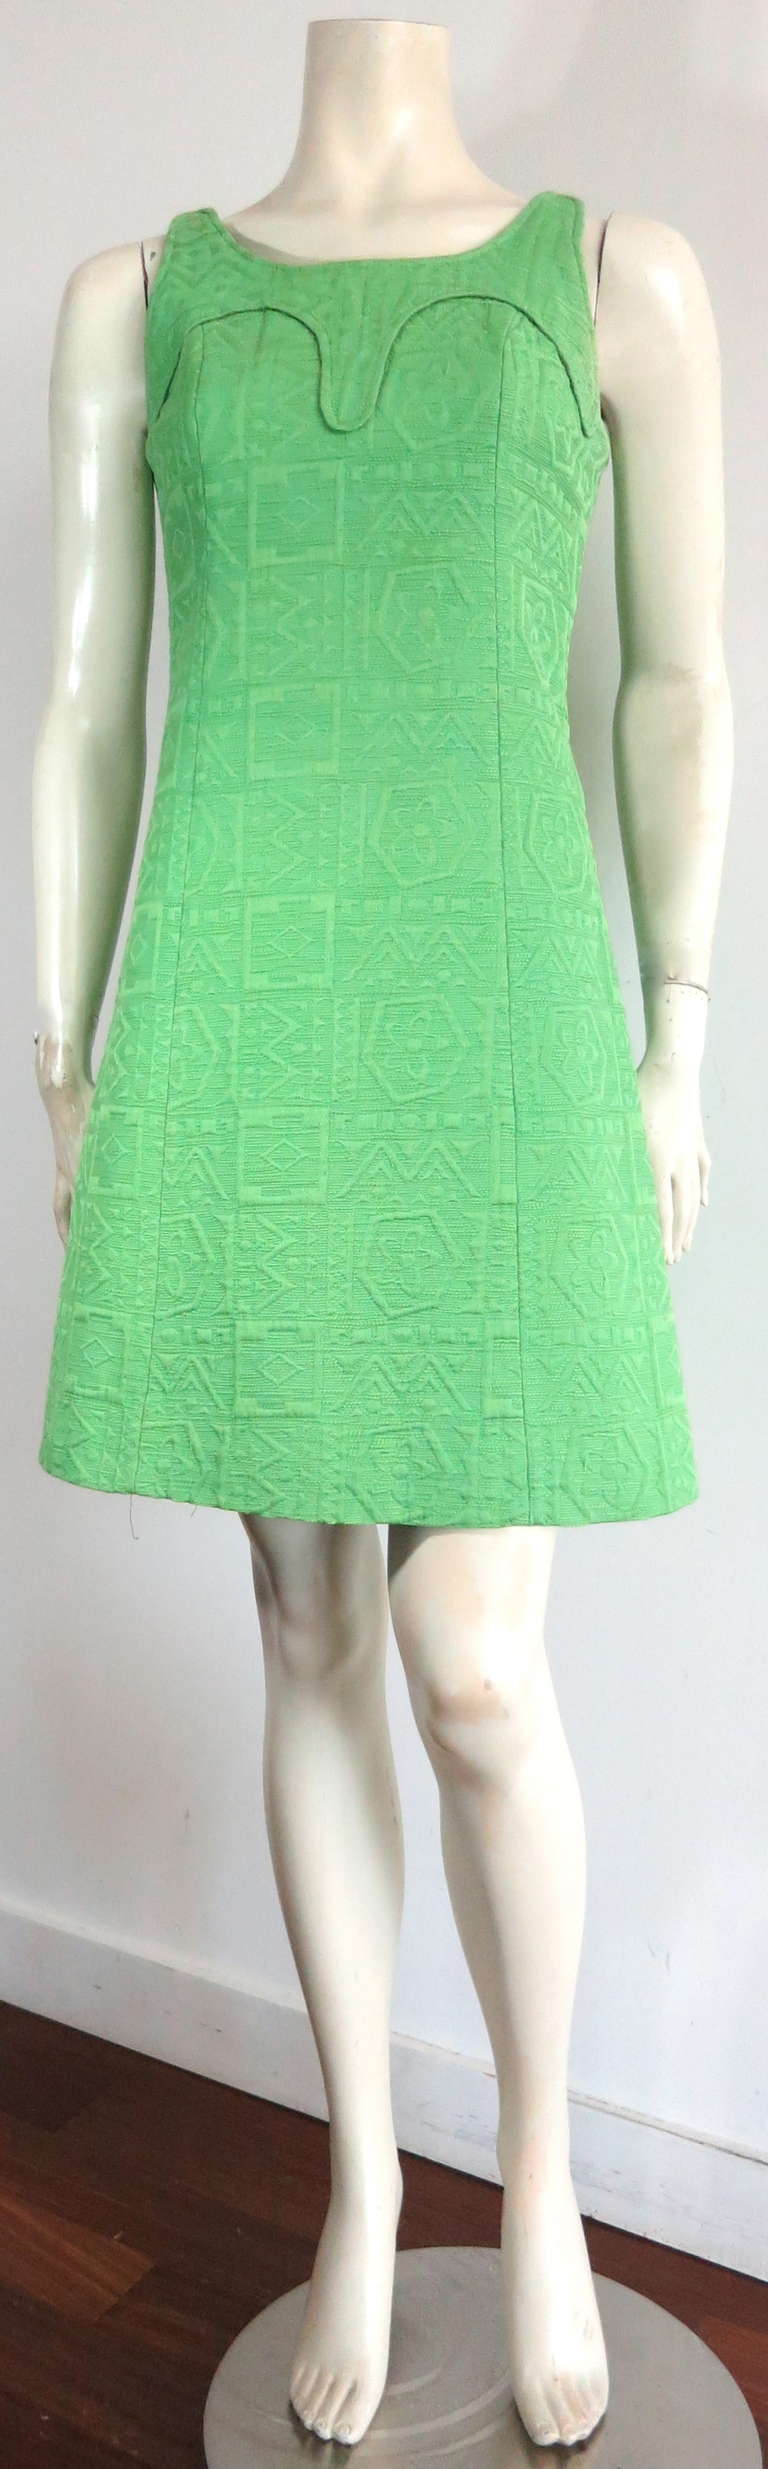 Vintage LOUIS FERAUD Mod dress with shaped yoke detail front.

The dress was designed by Louis Feraud in the 1960's in France.  

The base cloth is a thick, tapestry-weight fabric that features a geometric and floral woven